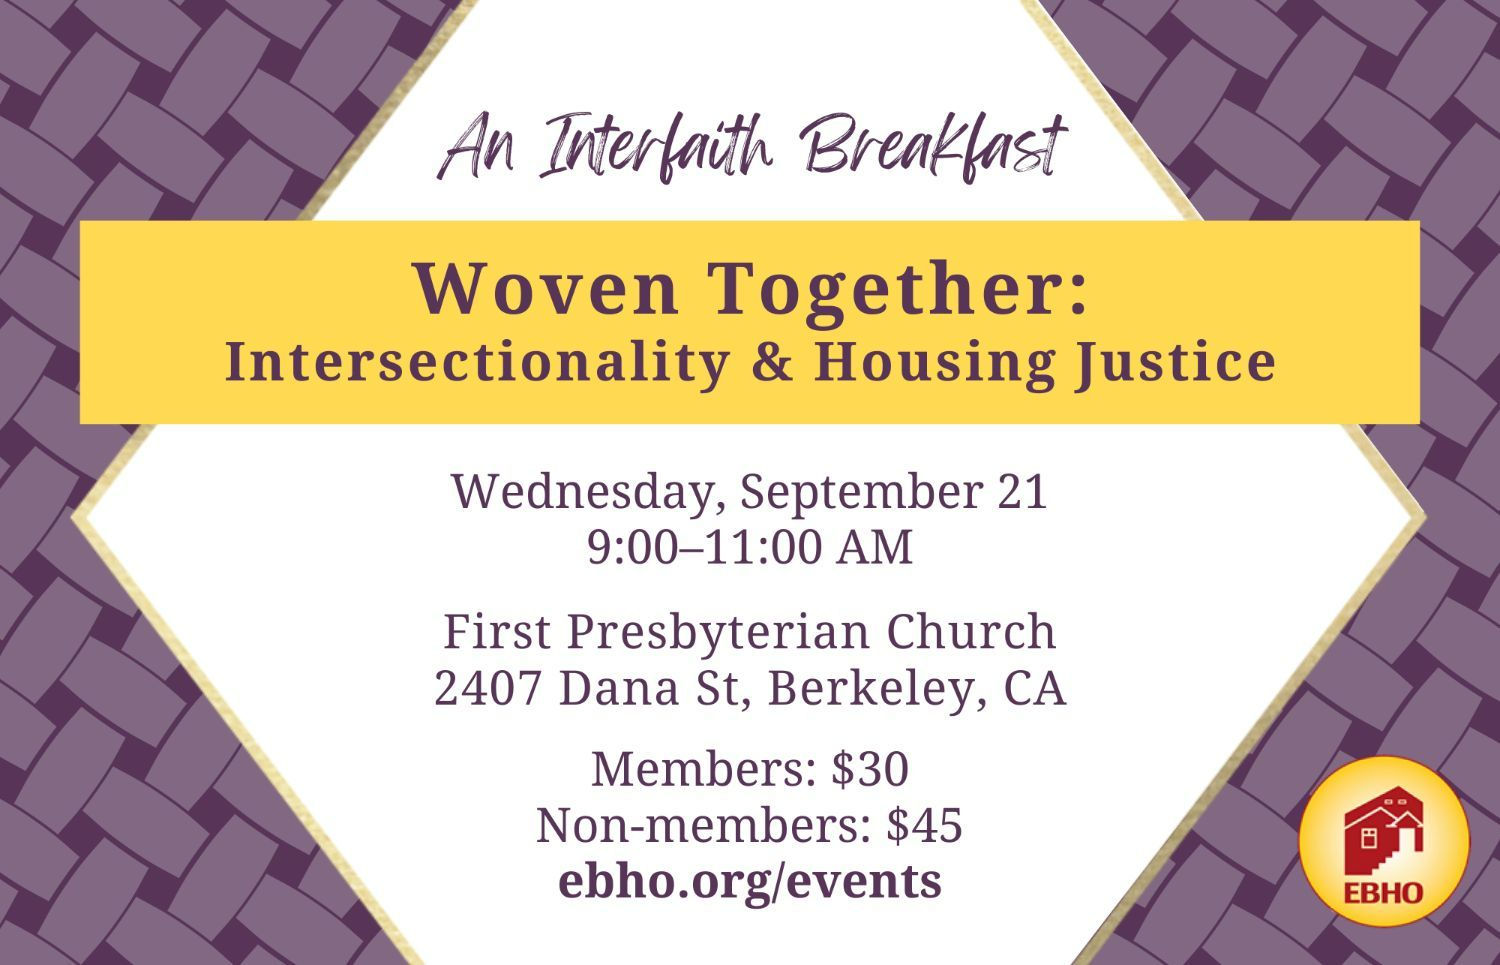 EBHO graphic for interfaith breakfast featuring event details